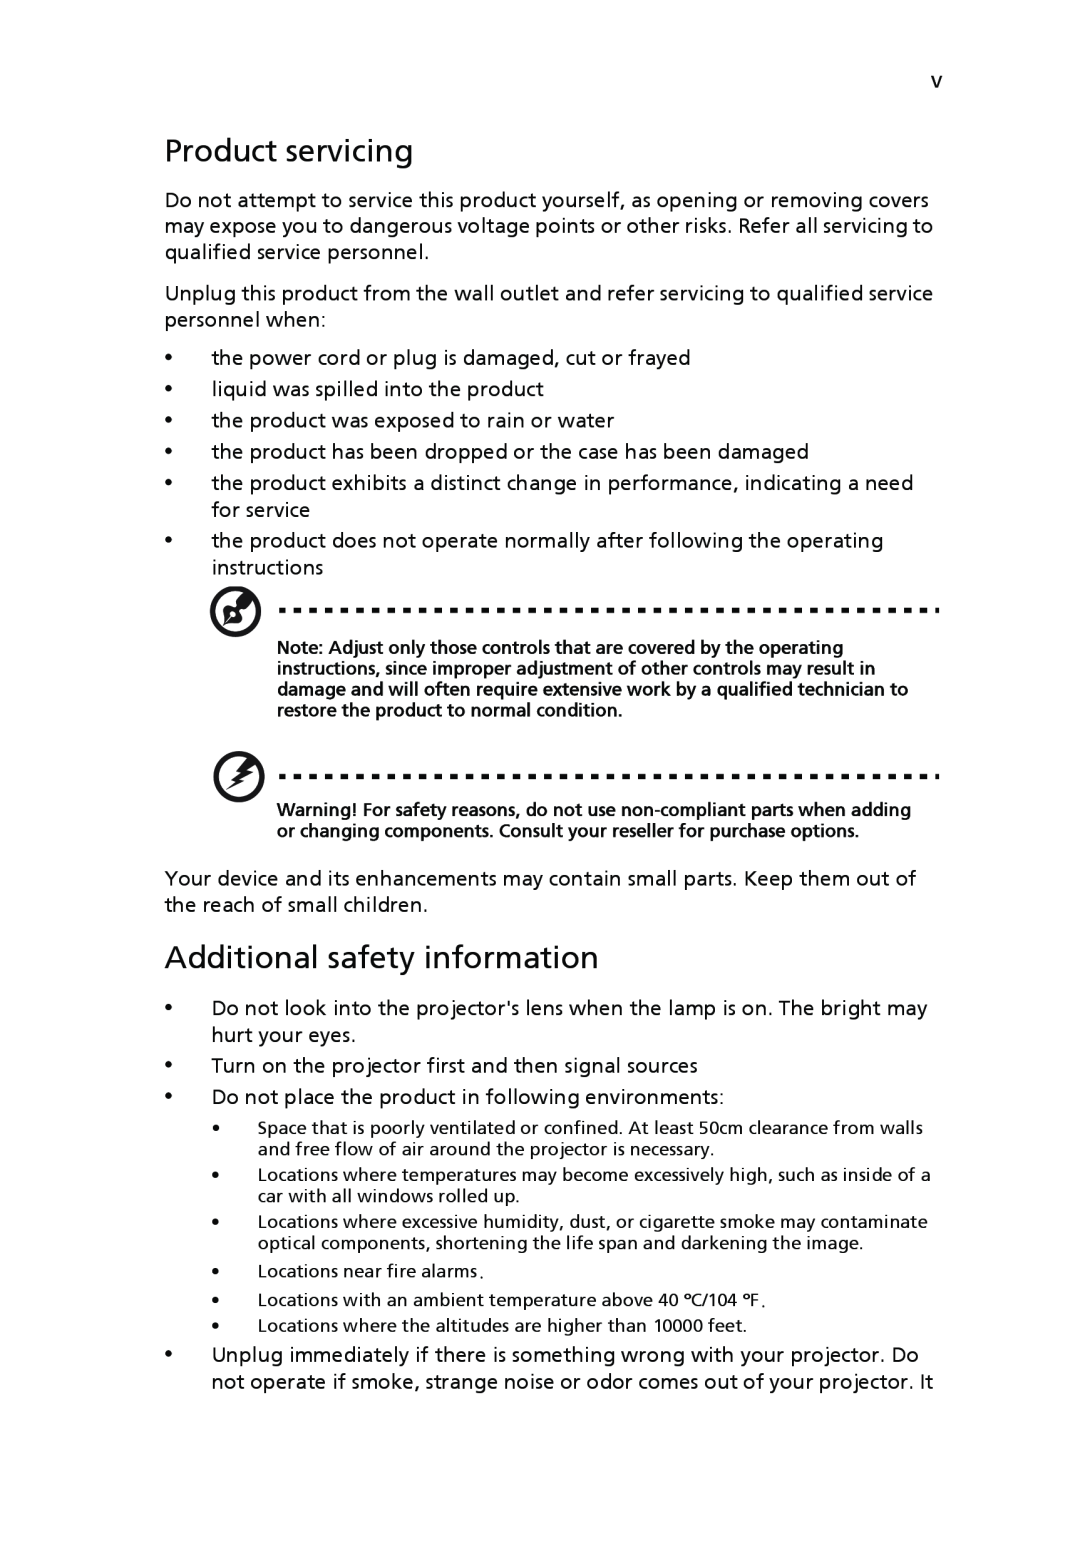 Acer H5350 manual Product servicing, Additional safety information 